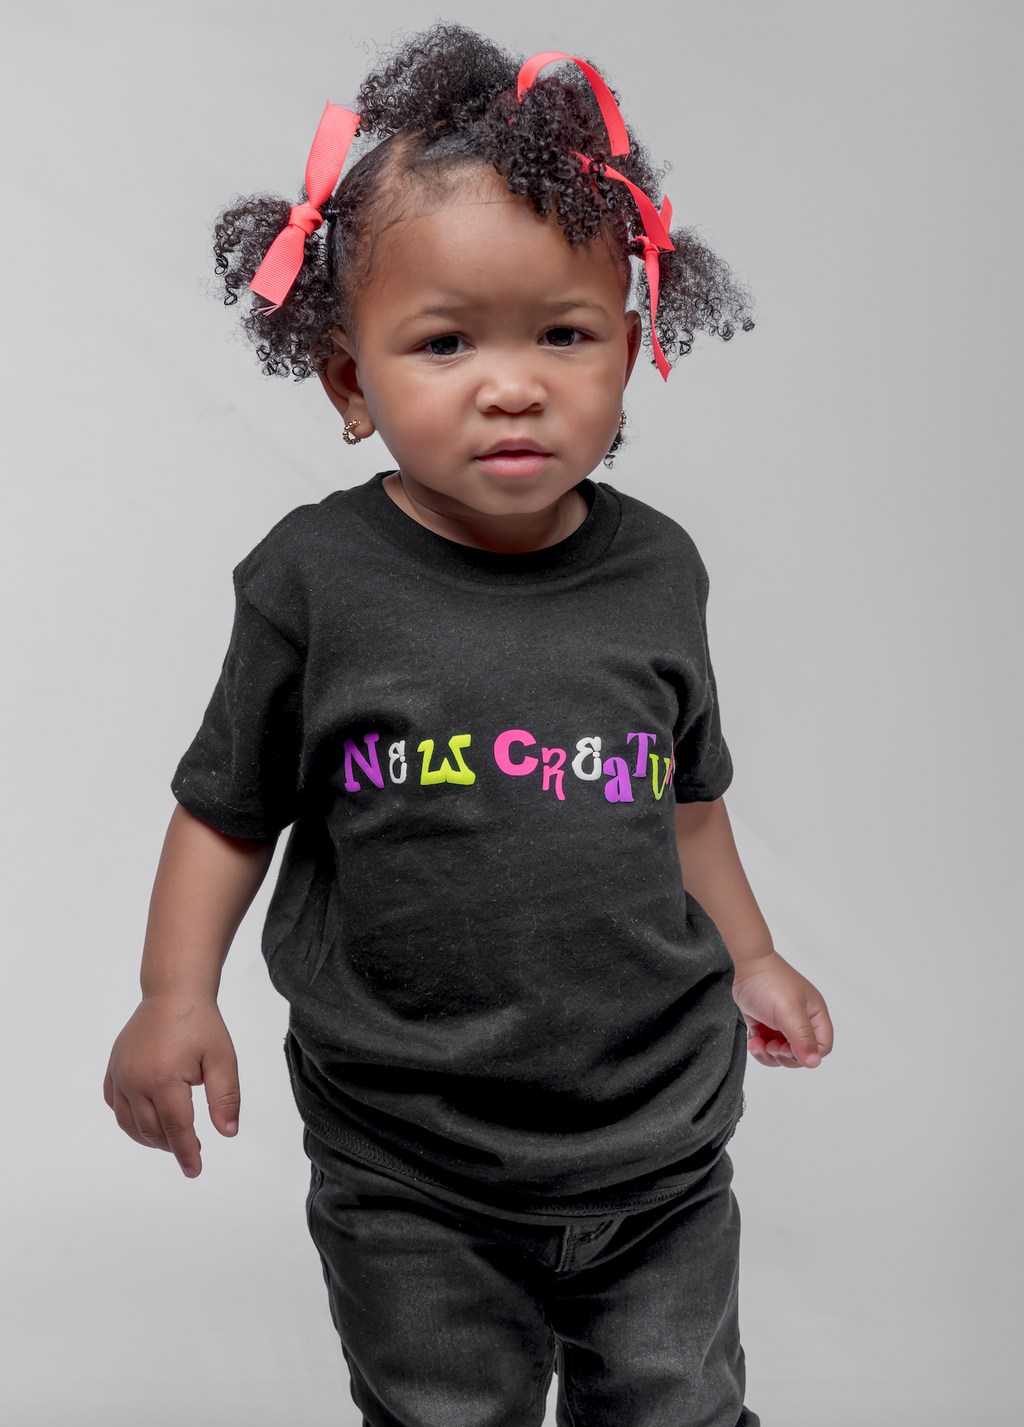 Children New Creature Shirts for Toddlers